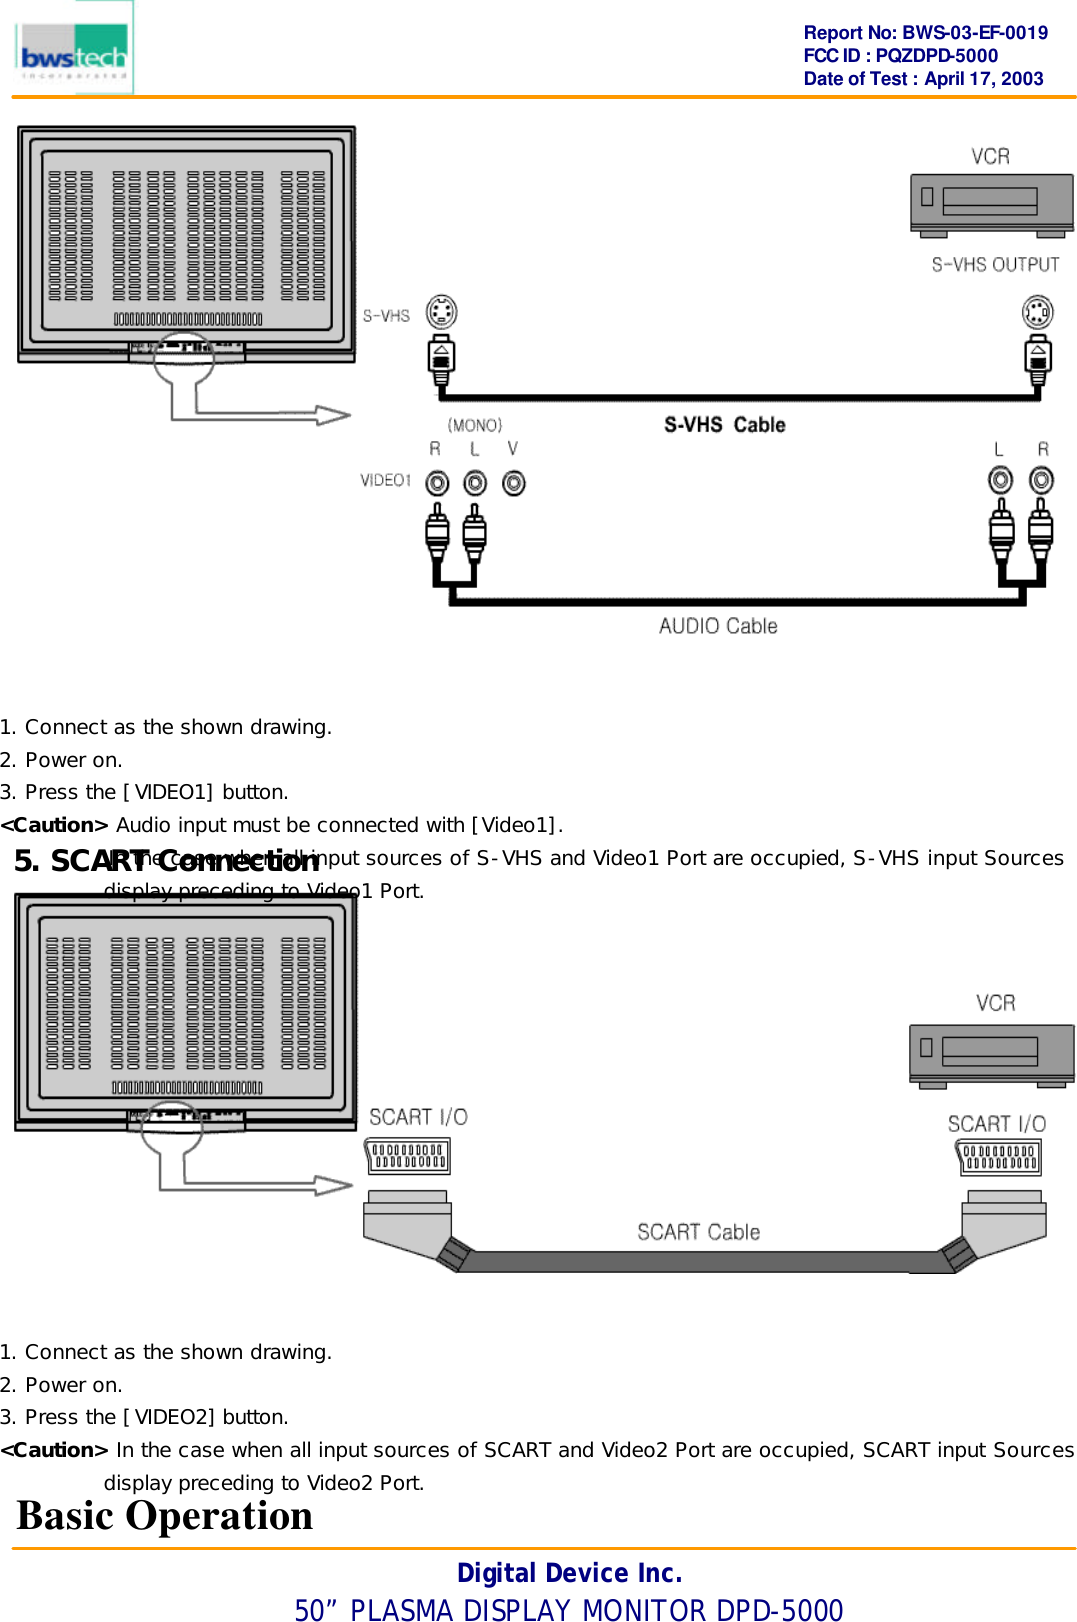      Report No: BWS-03-EF-0019 FCC ID : PQZDPD-5000 Date of Test : April 17, 2003 Digital Device Inc. 50” PLASMA DISPLAY MONITOR DPD-5000      5. SCART Connection      Basic Operation 1. Connect as the shown drawing. 2. Power on. 3. Press the [VIDEO1] button. &lt;Caution&gt; Audio input must be connected with [Video1].           In the case when all input sources of S-VHS and Video1 Port are occupied, S-VHS input Sources display preceding to Video1 Port. 1. Connect as the shown drawing. 2. Power on. 3. Press the [VIDEO2] button. &lt;Caution&gt; In the case when all input sources of SCART and Video2 Port are occupied, SCART input Sources display preceding to Video2 Port.  